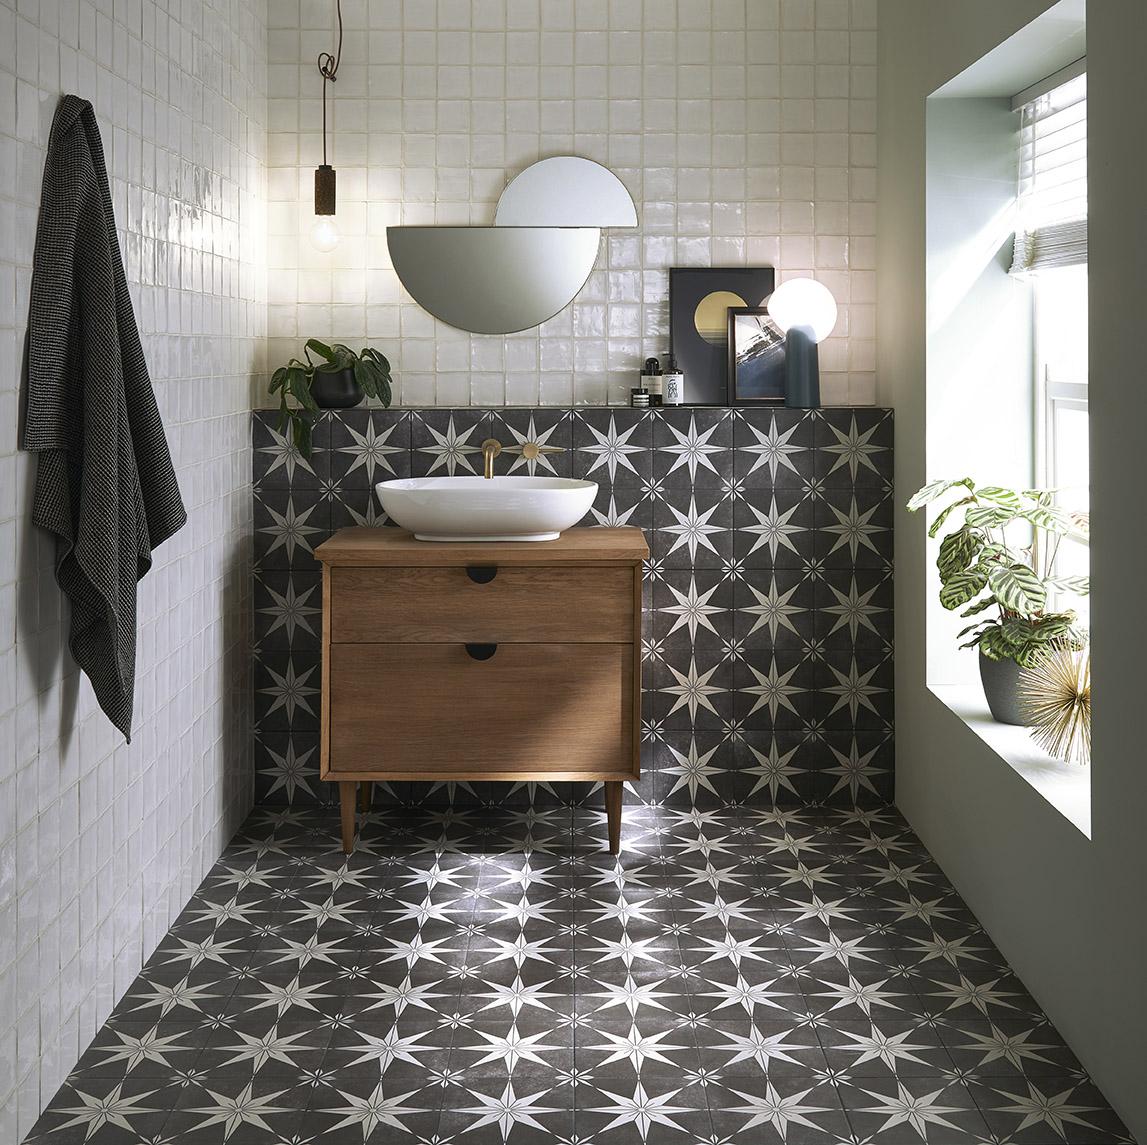 Clean Grout On Floor And Wall Tile, Is Black Floor Tile Hard To Keep Clean